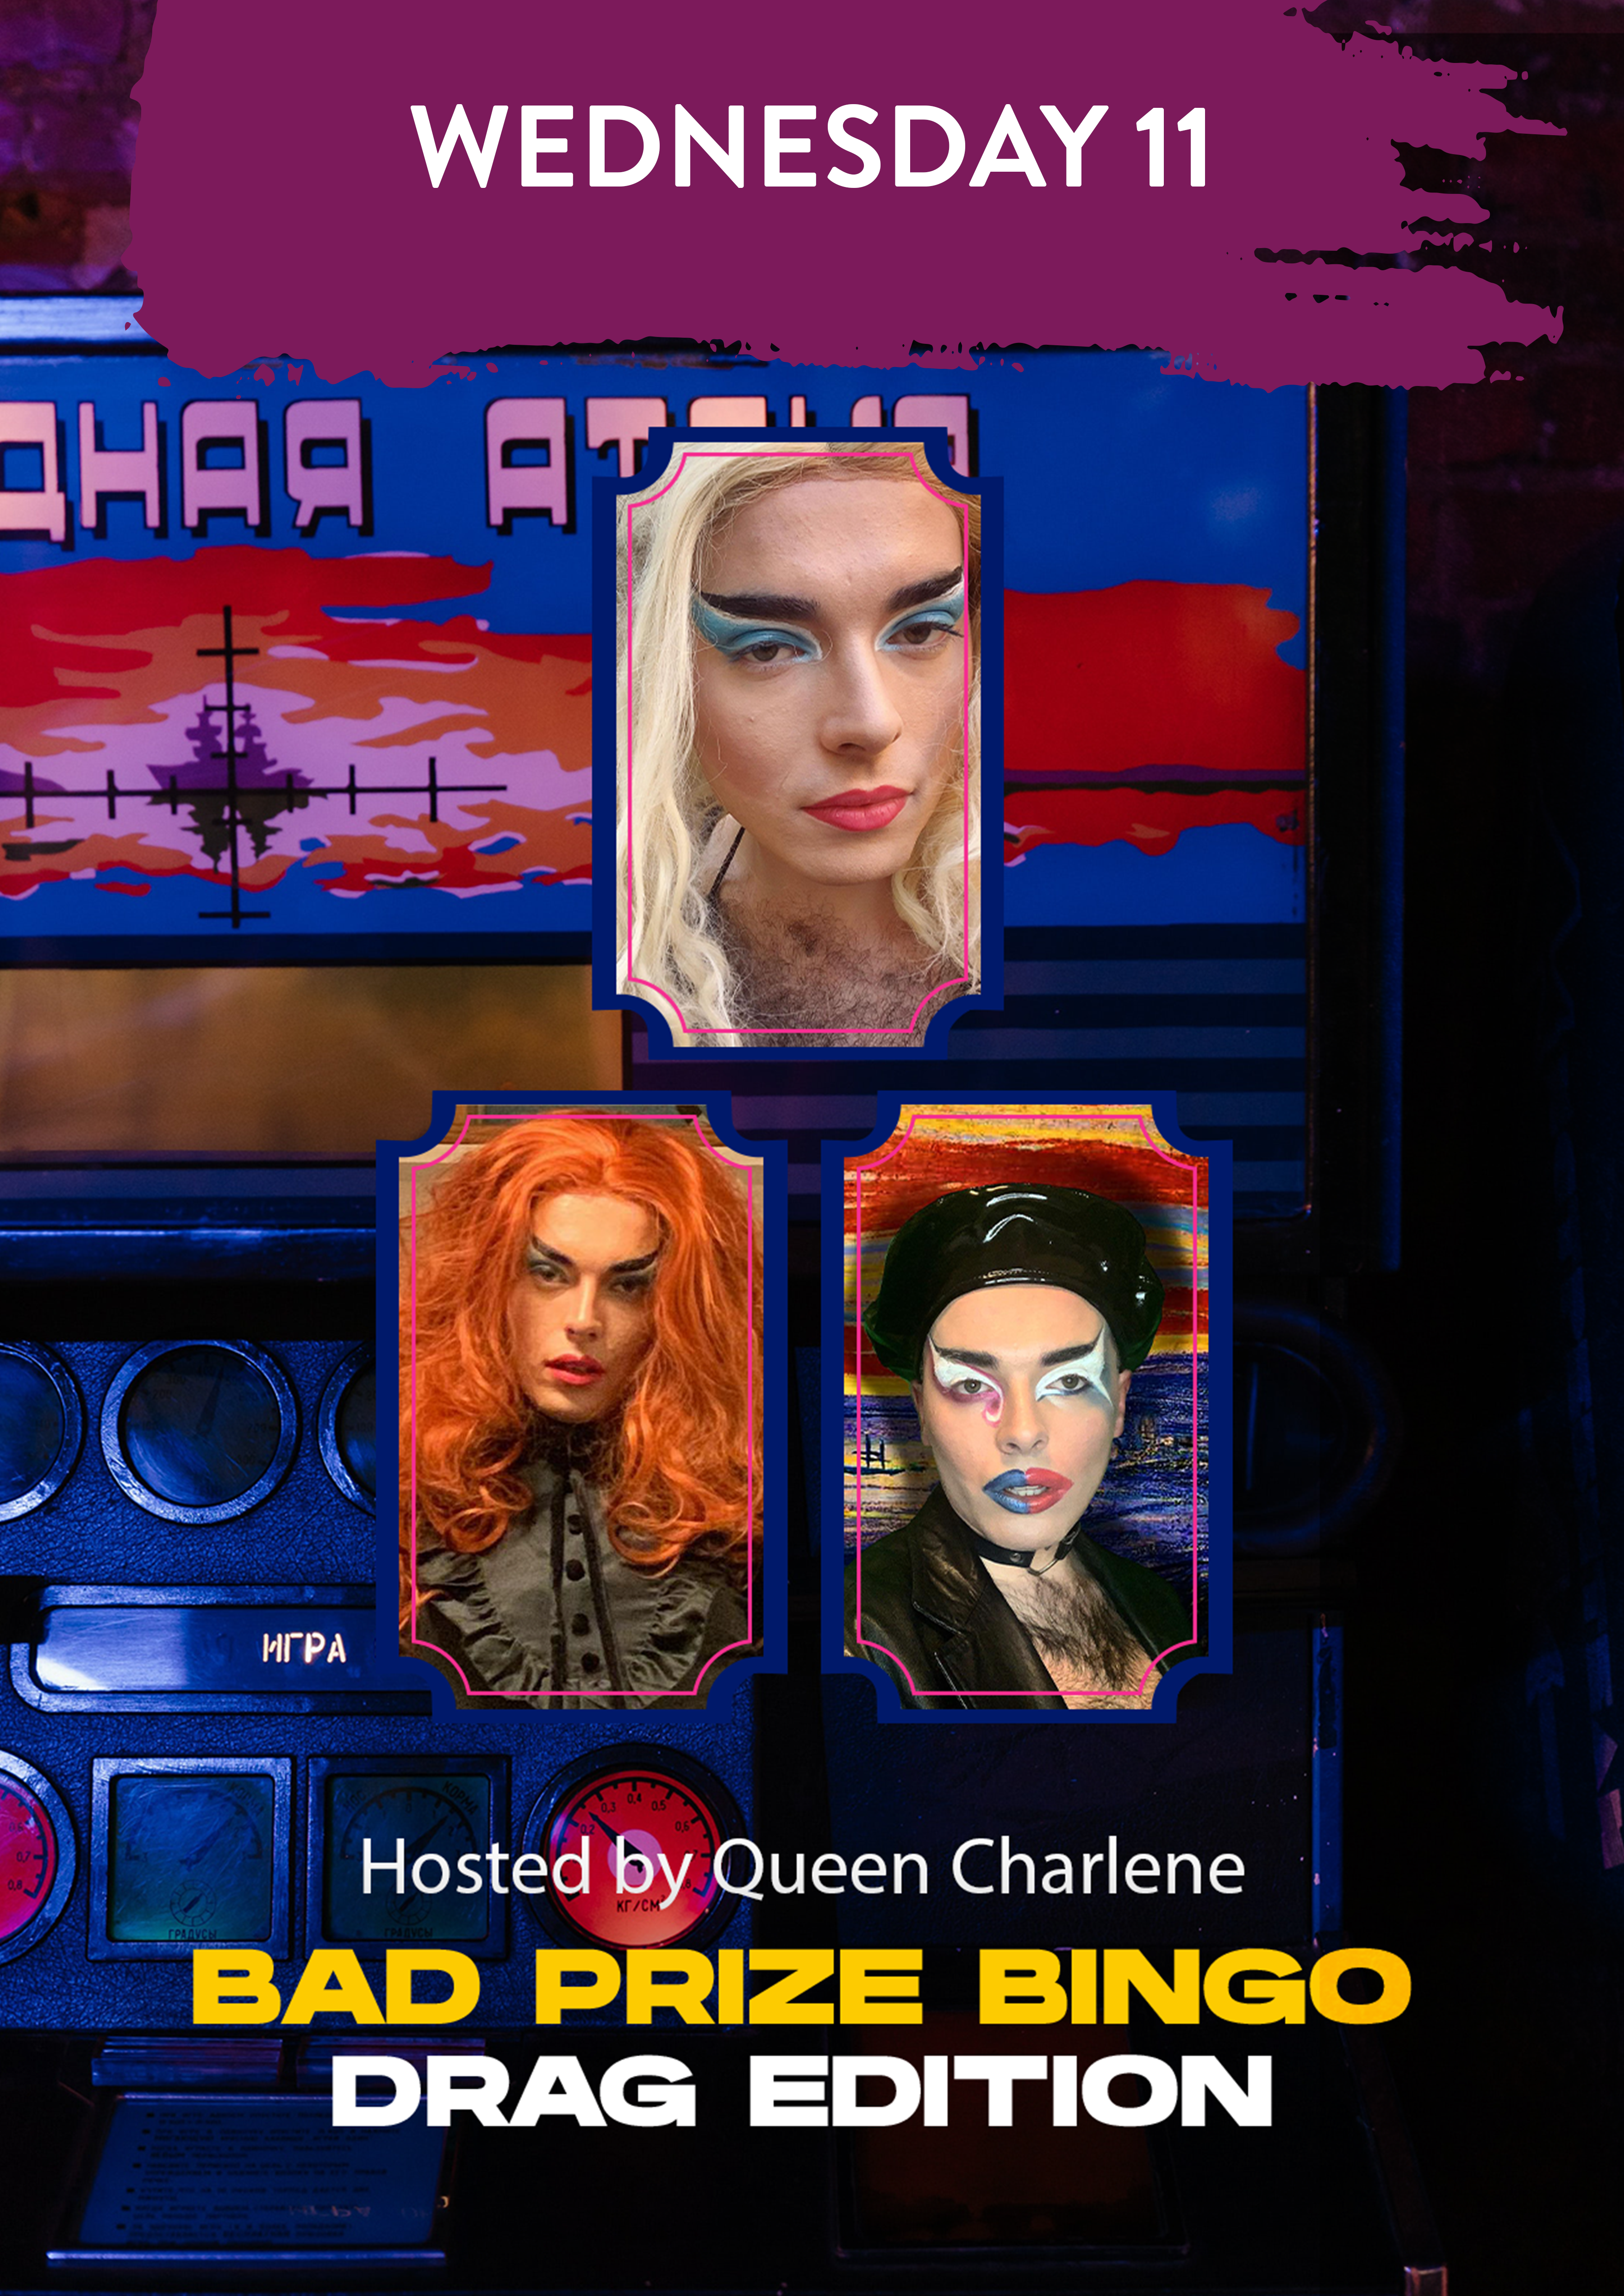 Wednesday 11 January. Bad Prize Bingo. Drag Edition. Hosted by Queen Charlene.